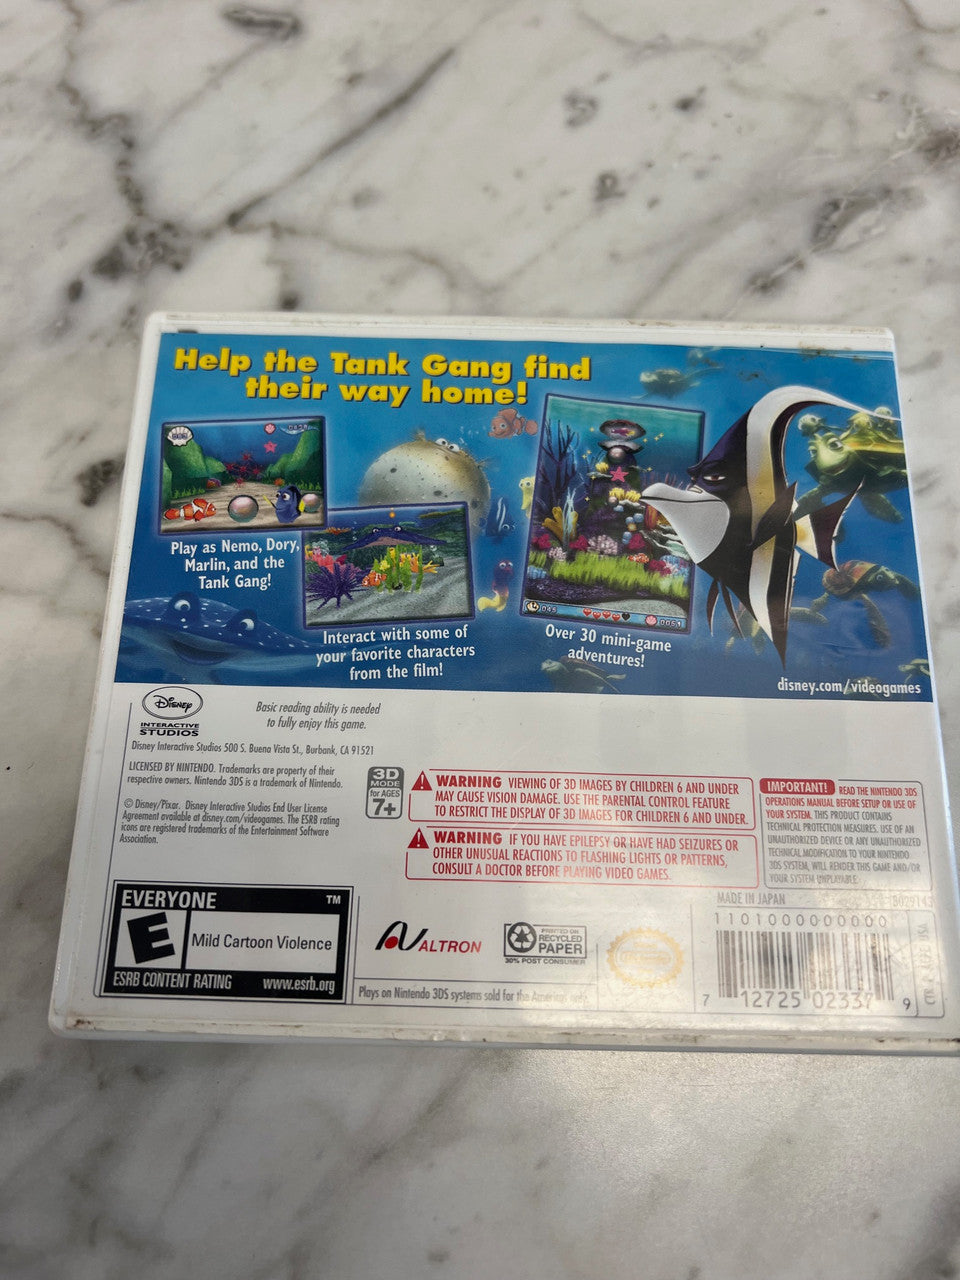 Finding Nemo Escape to the Big Blue Nintendo 3DS case and manual only